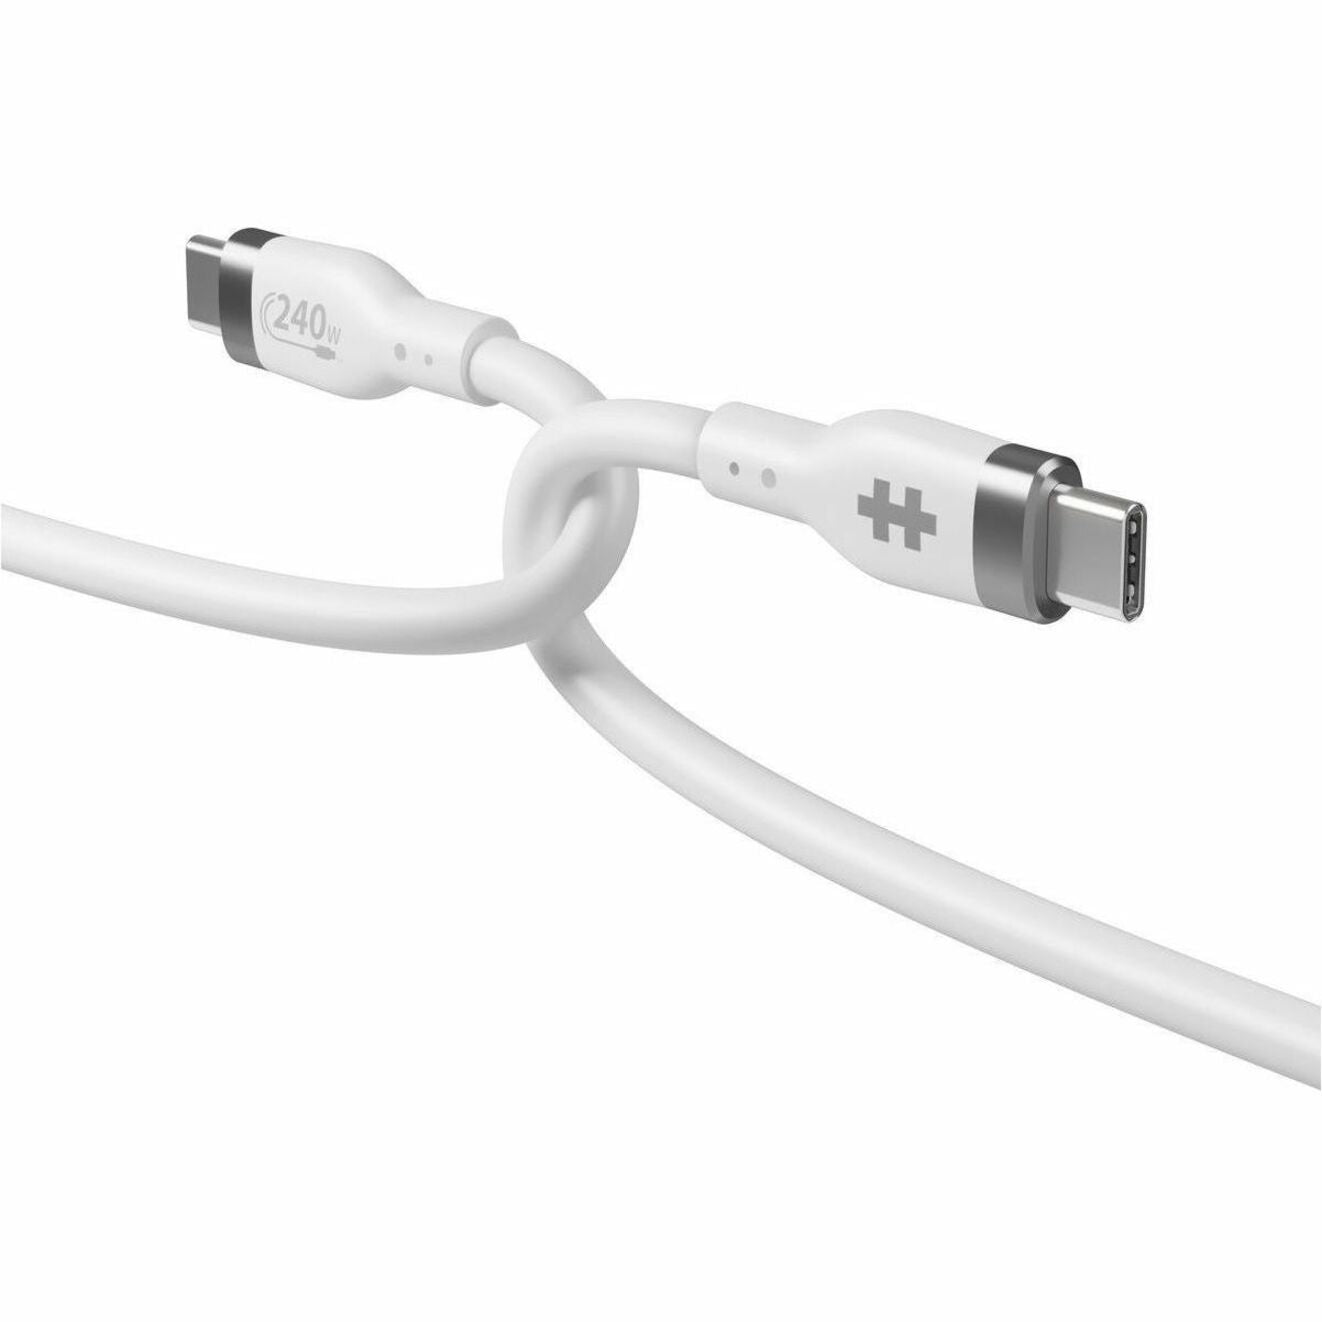 Targus Charging Cable - 3.28 ft Cord Length - USB Type C (HJ4001WHGL)